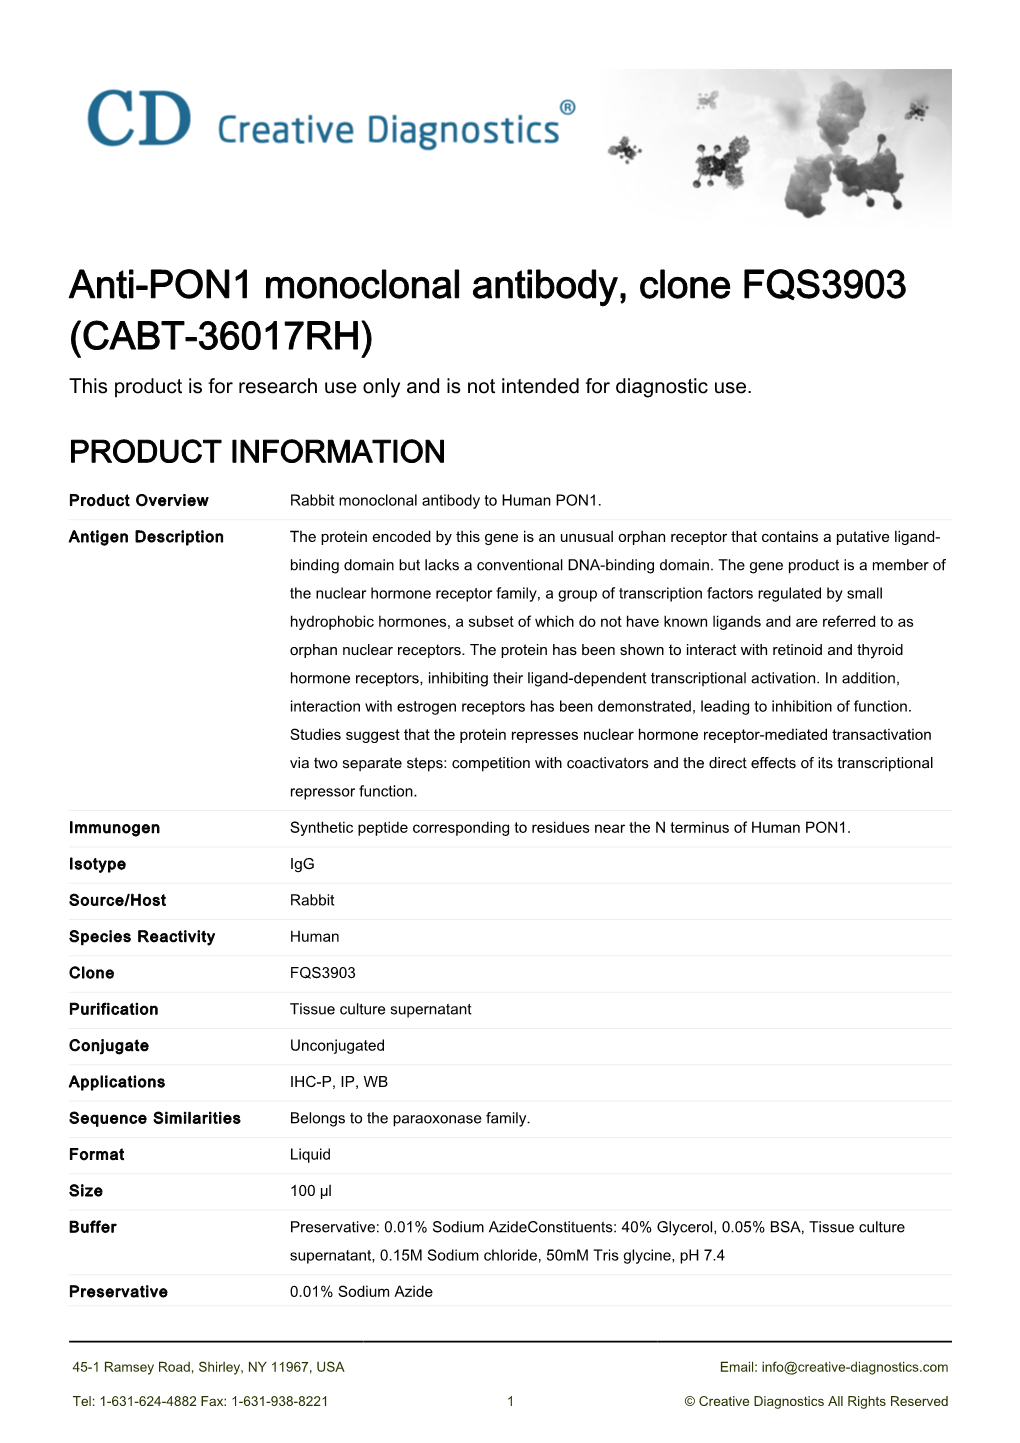 Anti-PON1 Monoclonal Antibody, Clone FQS3903 (CABT-36017RH) This Product Is for Research Use Only and Is Not Intended for Diagnostic Use